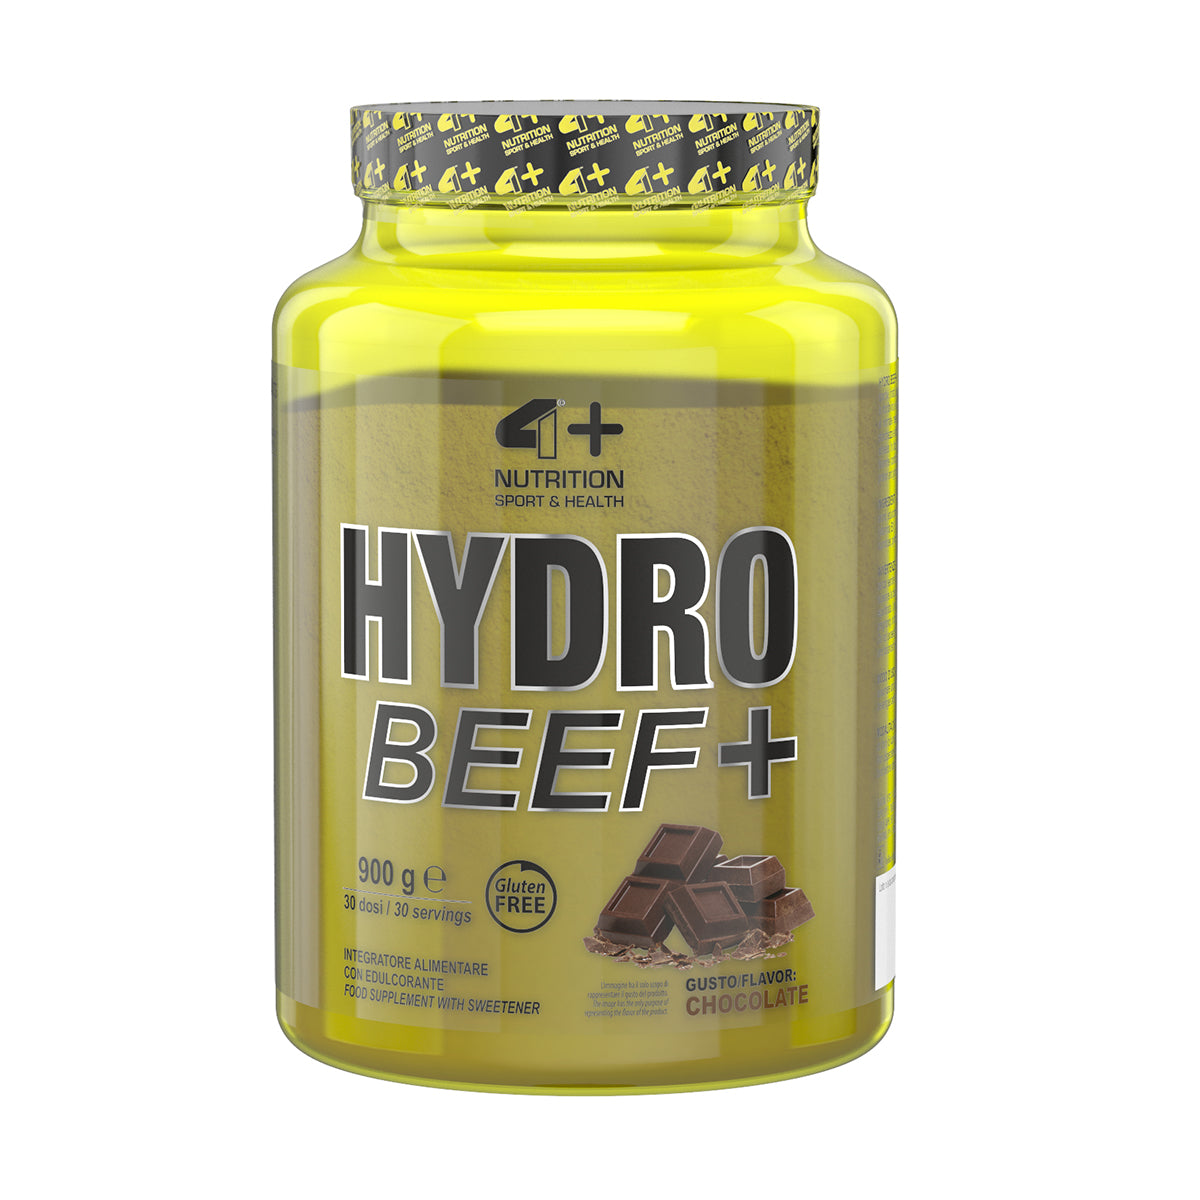 4+ Nutrition BEEF+